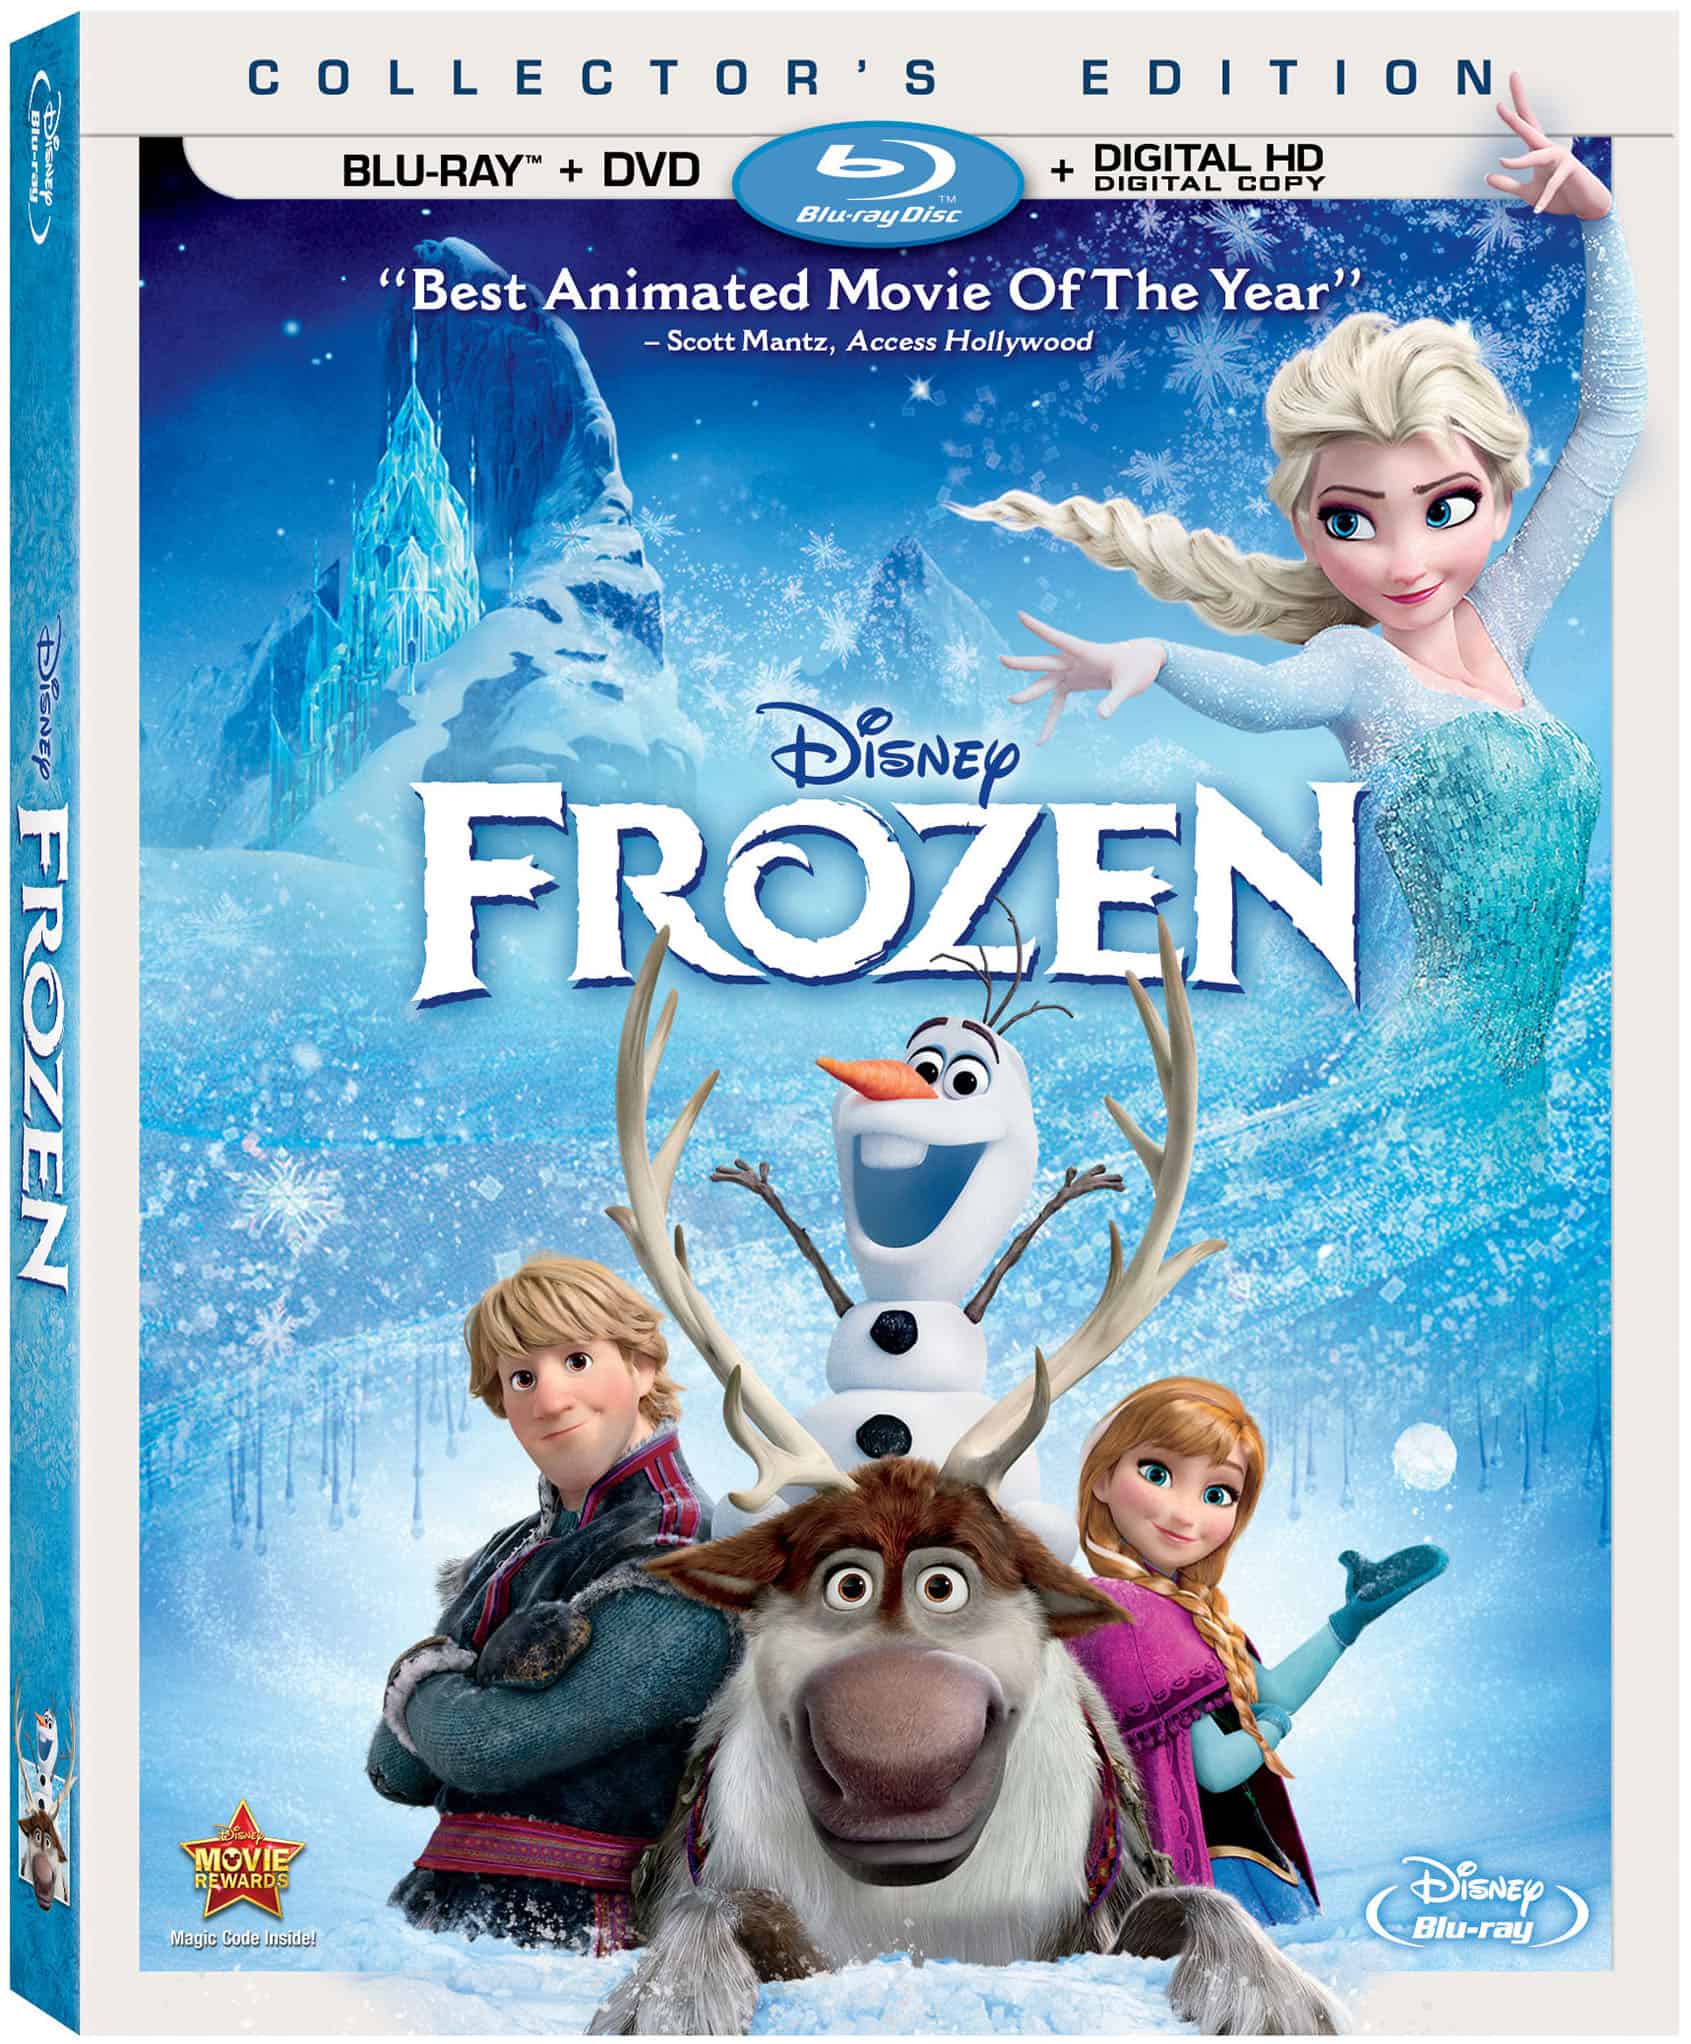 Have A Disney Frozen Family Movie Night With These FREE Disney Frozen Activities!